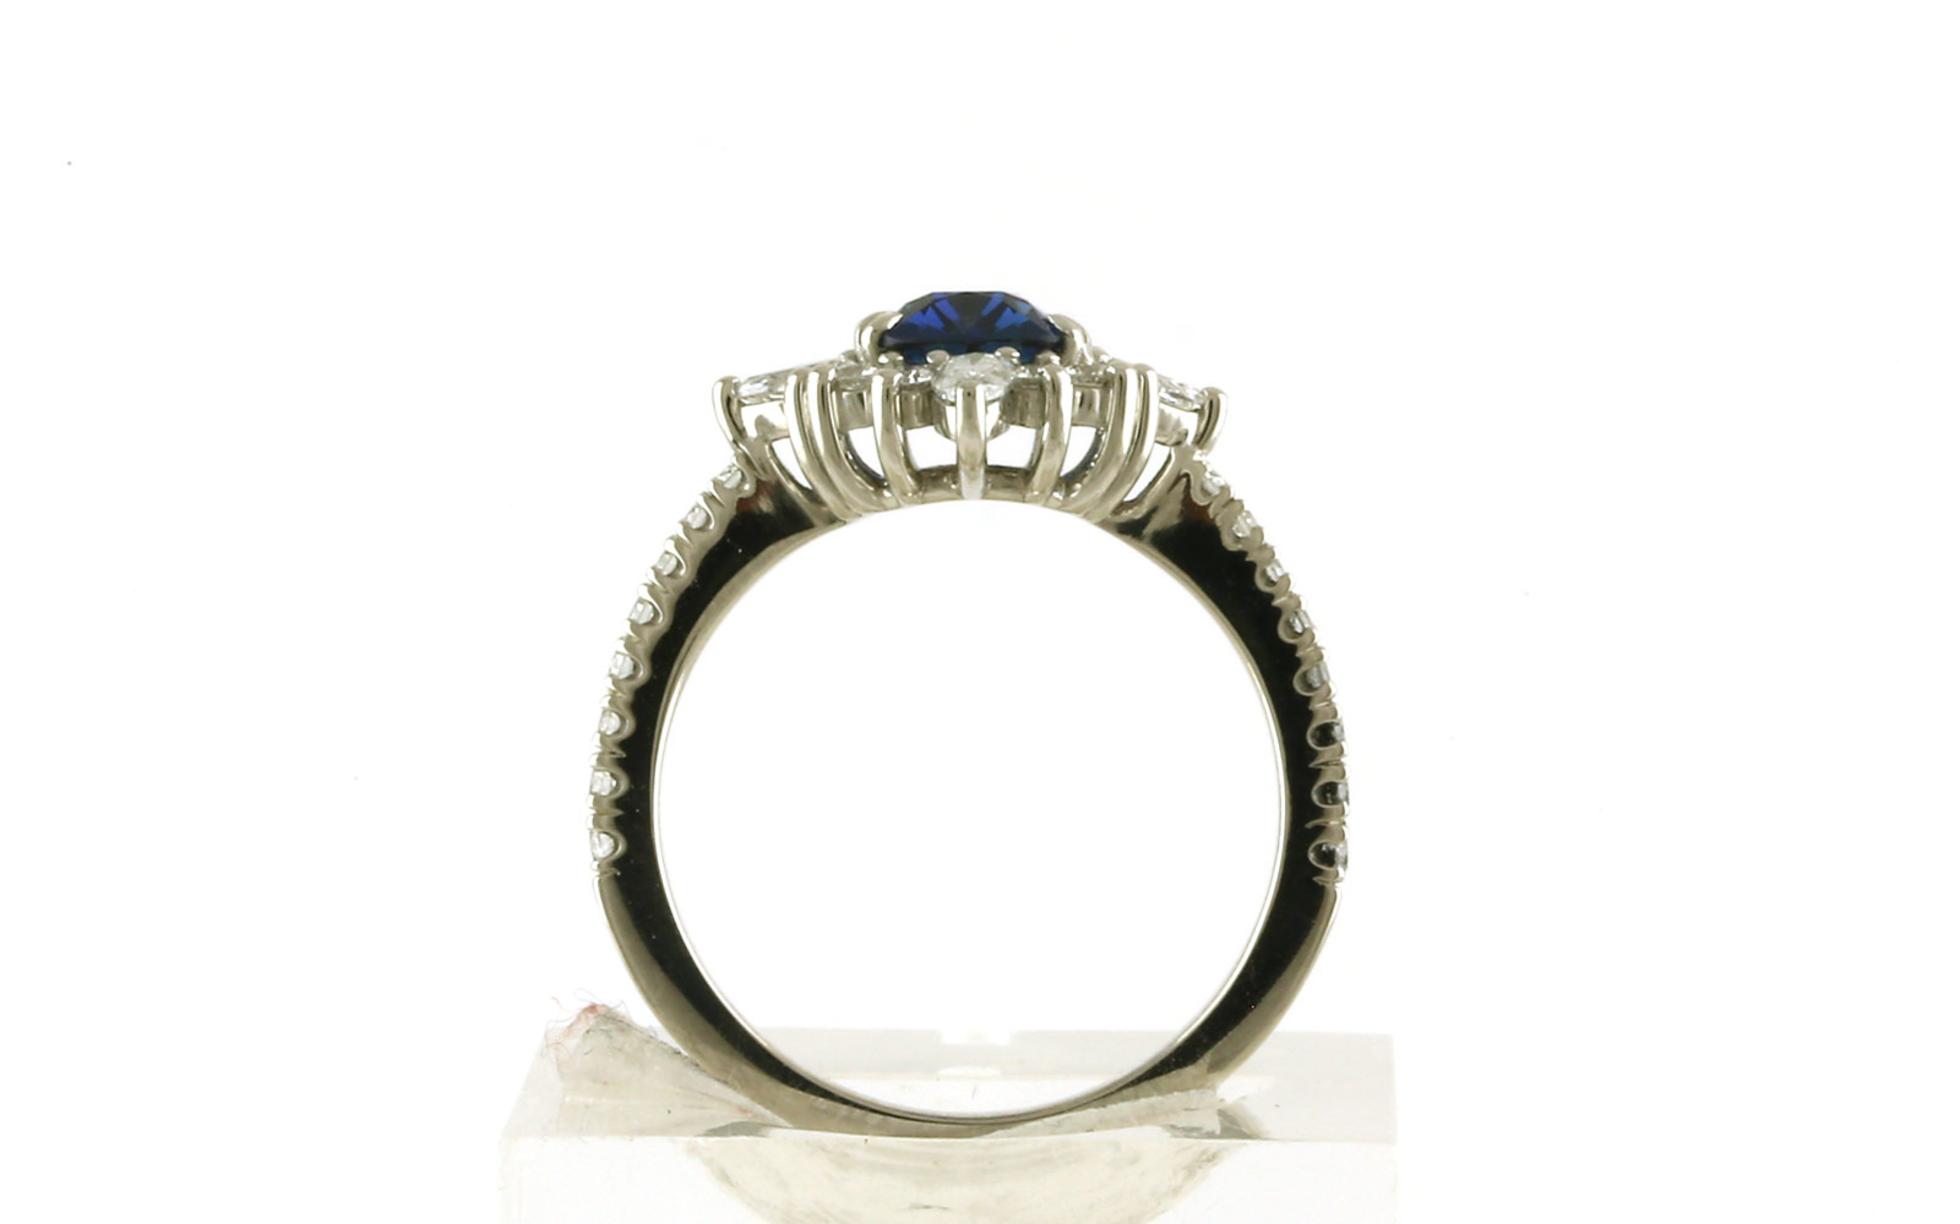 Celestial Halo-style Cushion-cut Montana Yogo Sapphire and Diamond Ring in White Gold (2.64cts TWT)